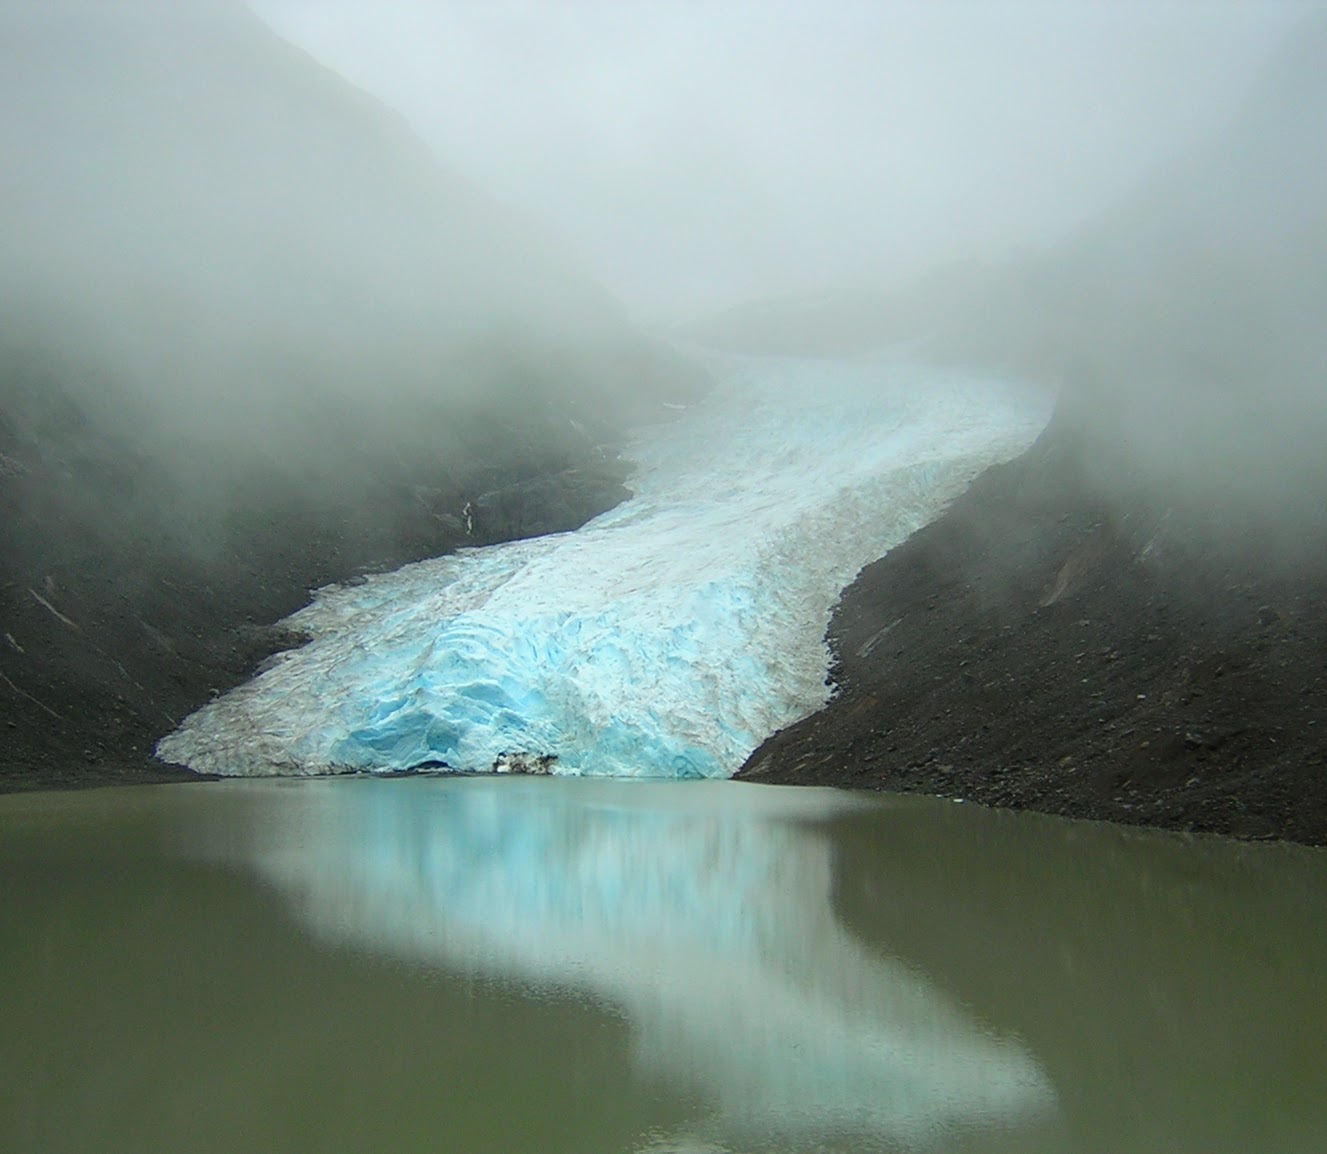 The toe of a glacier at the edge of a lake. The glacier is between two sides of a rocky hillside. It's a foggy day